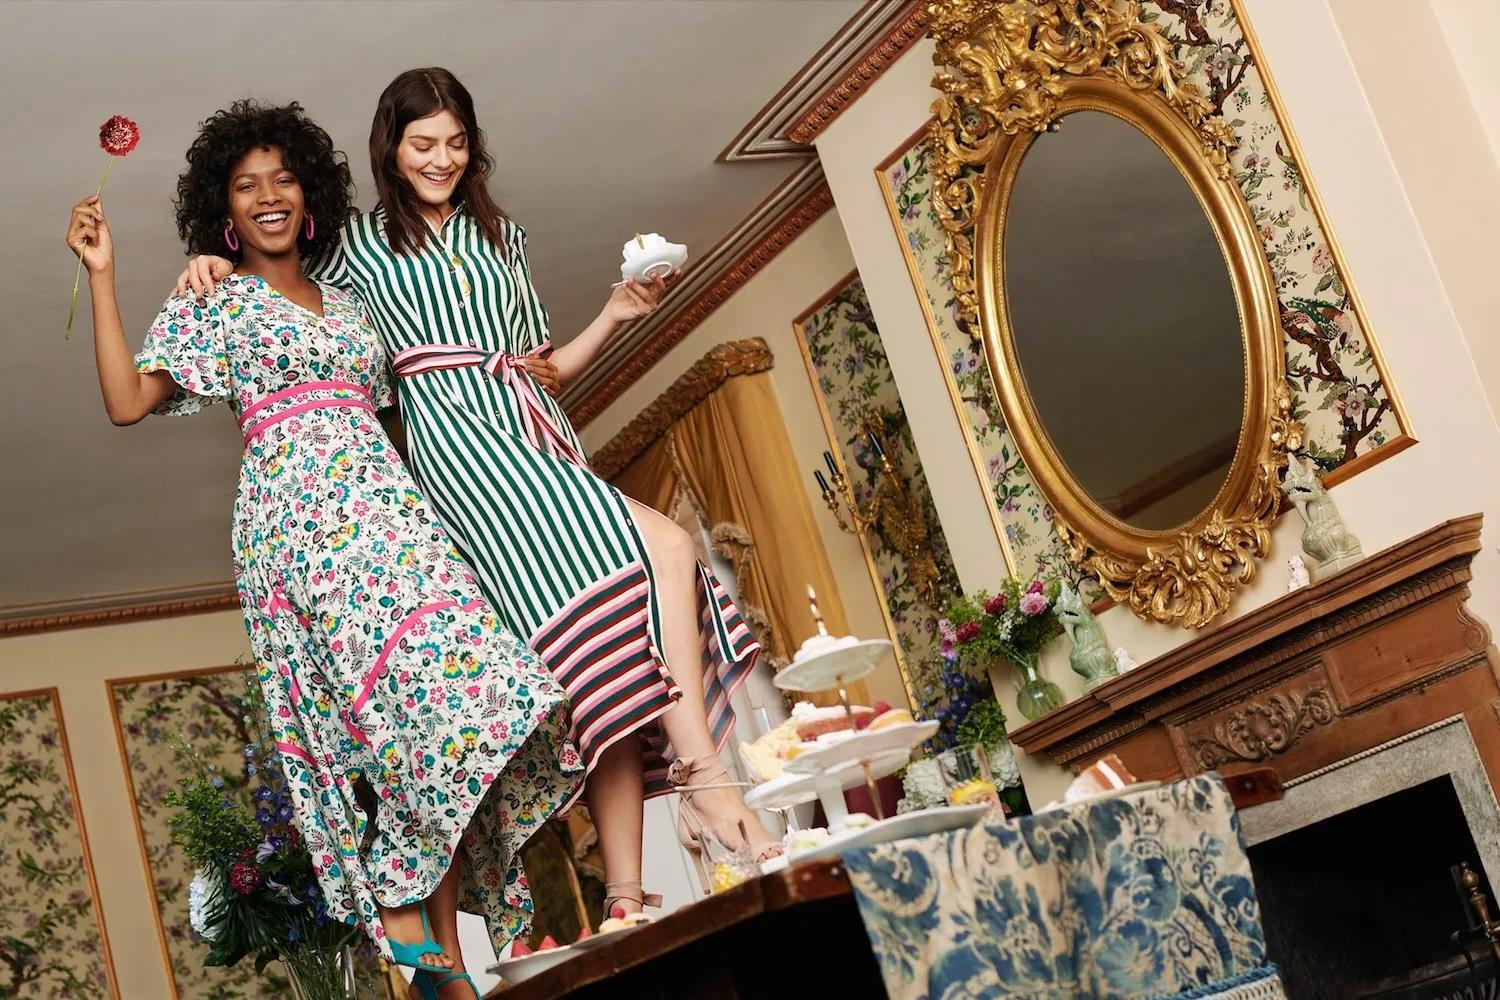 Customer and marketing at Boden, Boden